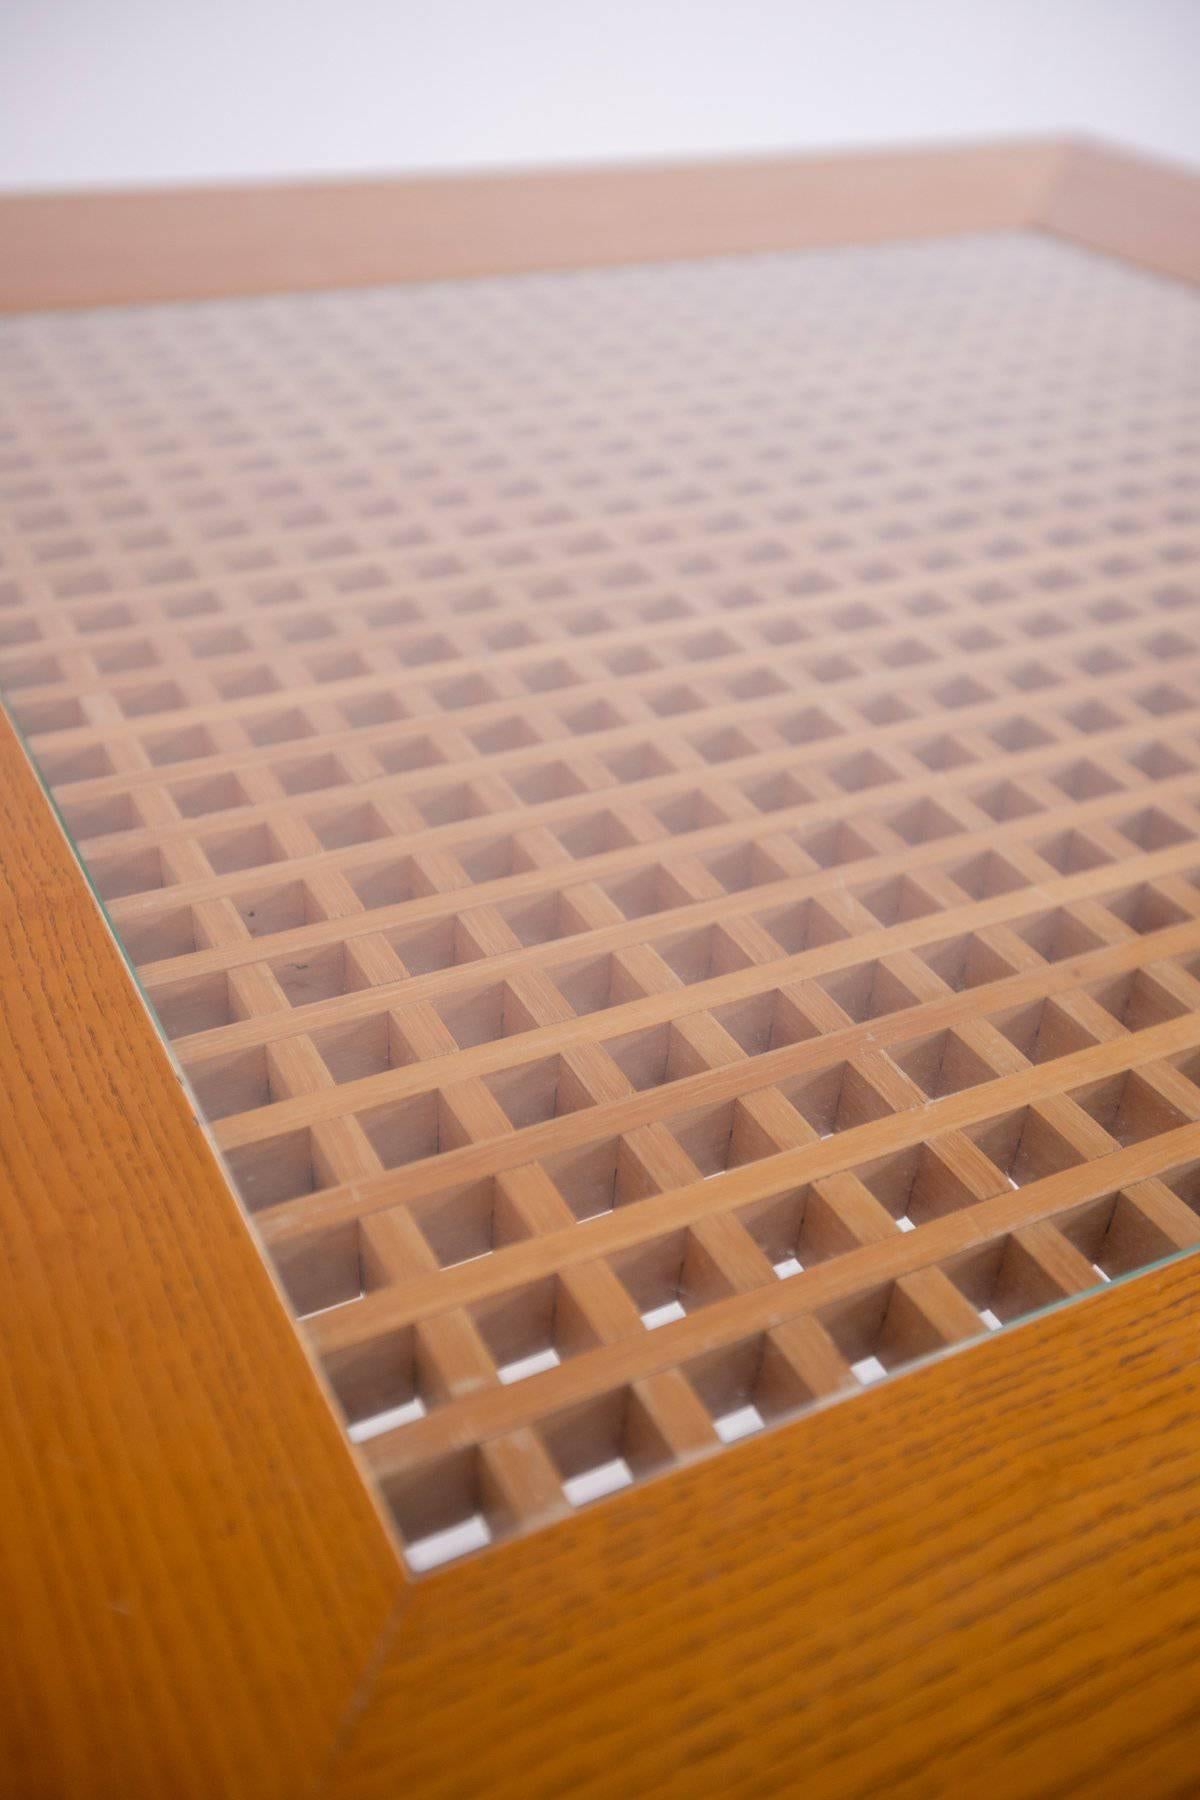 Italian wooden table, 1960 design by Gigi Sabadin.
The Gigi Sabadin table is of Italian manufacture and was made from finely crafted wood.
The main feature of the Gigi Sabadin table is the creation of a wooden lattice design present in the center